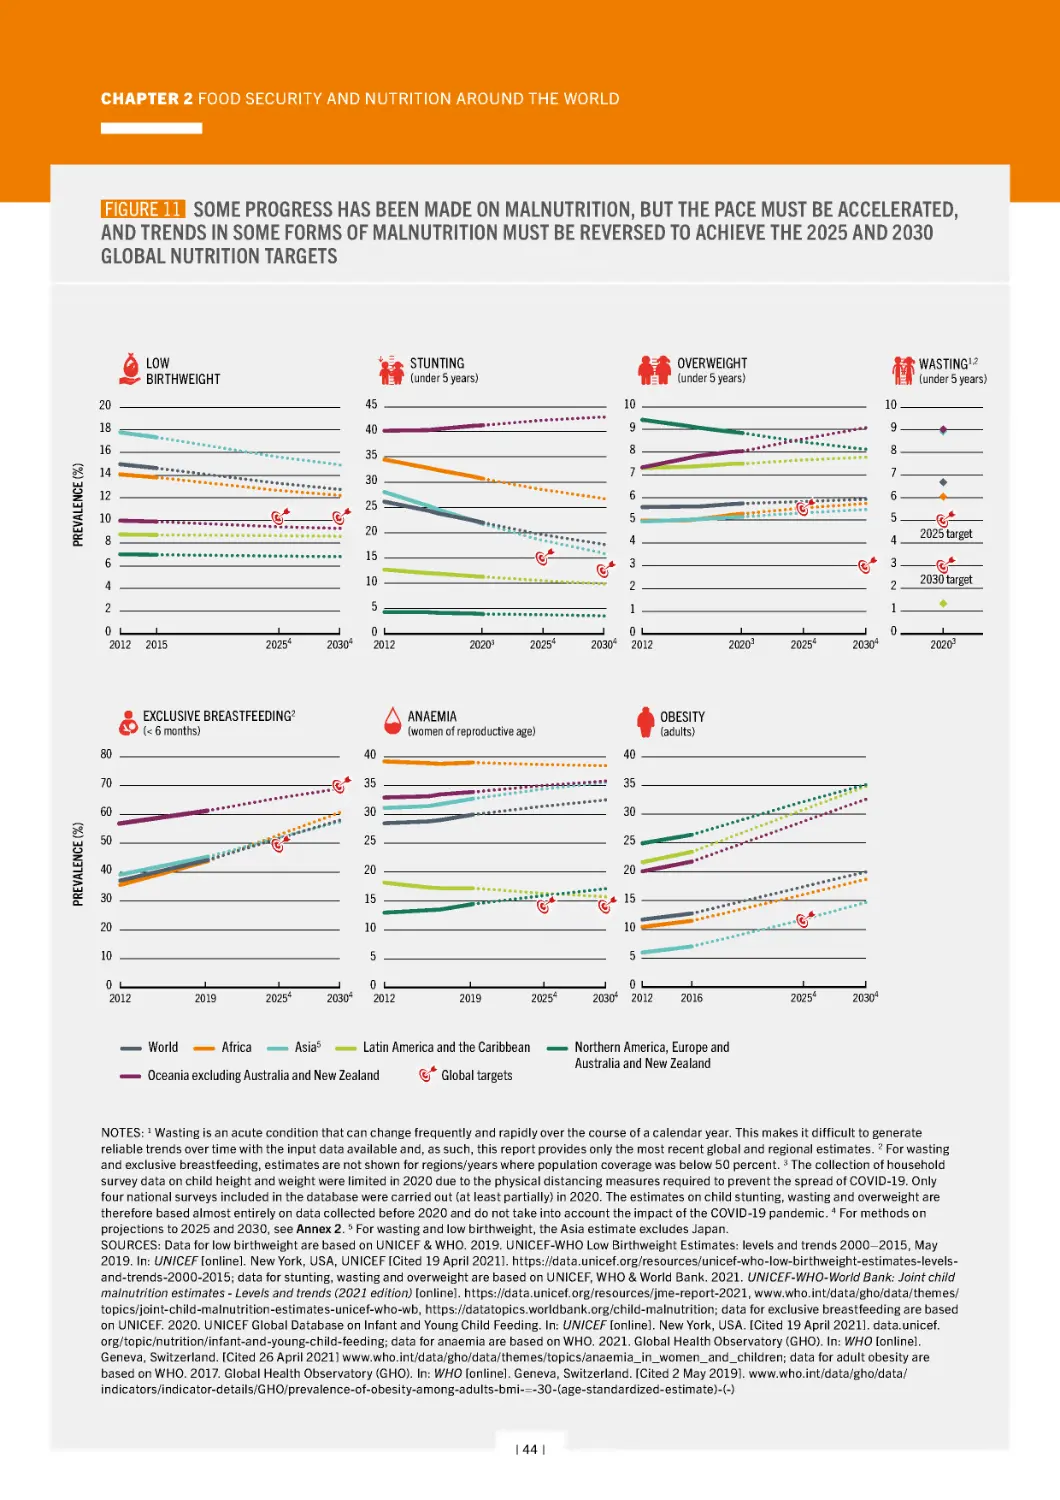 ﻿ figure 11   Some progress has been made on malnutrition, but the pace must be accelerated, and trends in some forms of malnutrition must be reversed to achieve the 2025 and 2030 global nutrition targets